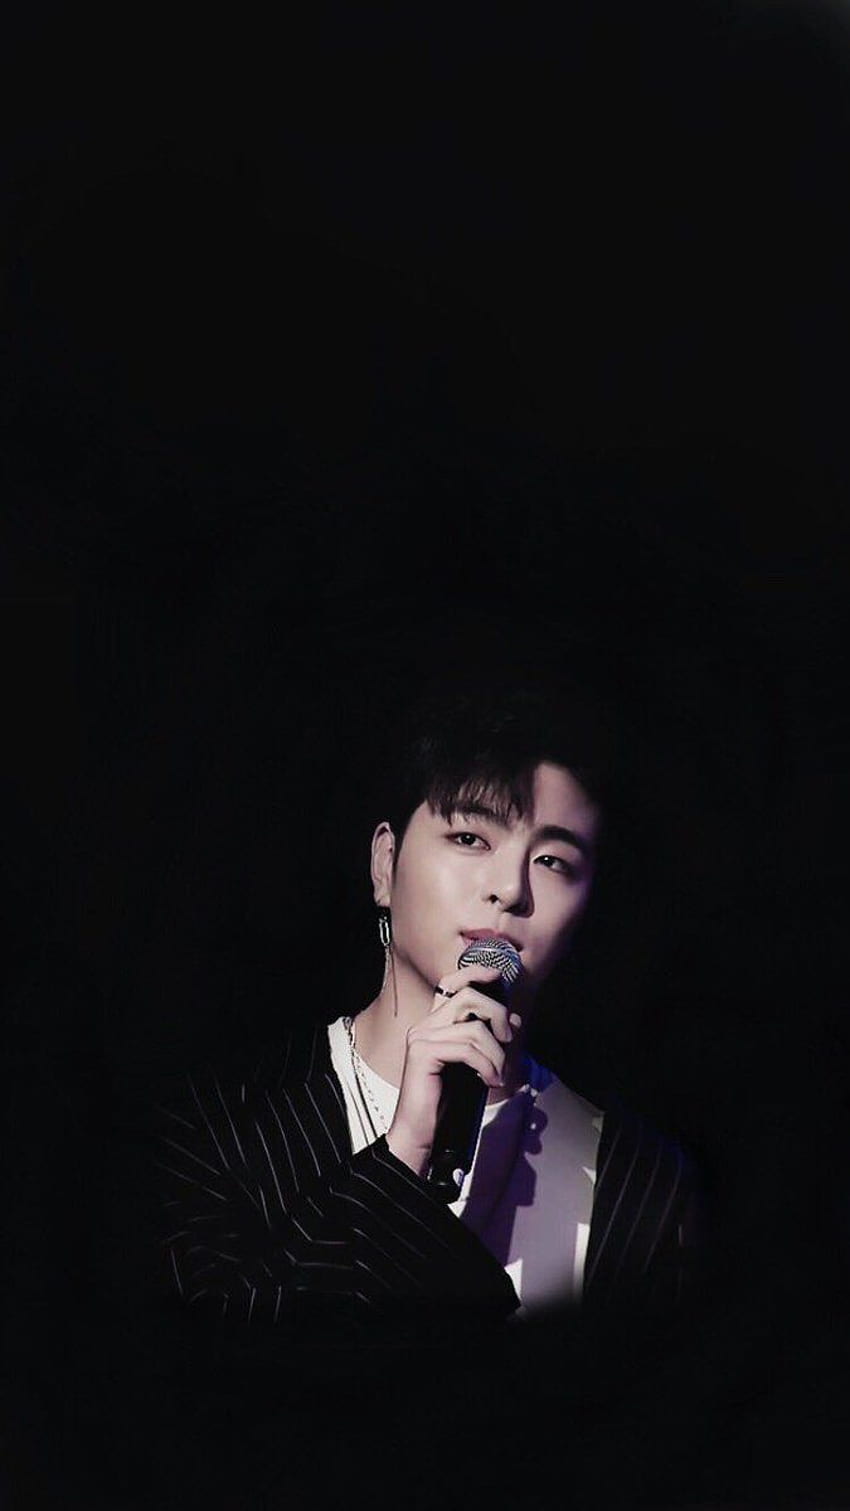 Rolo on Twitter for iPhone iKON JUNE Junhoe [] for your , Mobile & Tablet. Explore iPhone Ikon . iPhone Ikon , Junhoe IKon , Jay IKon HD phone wallpaper